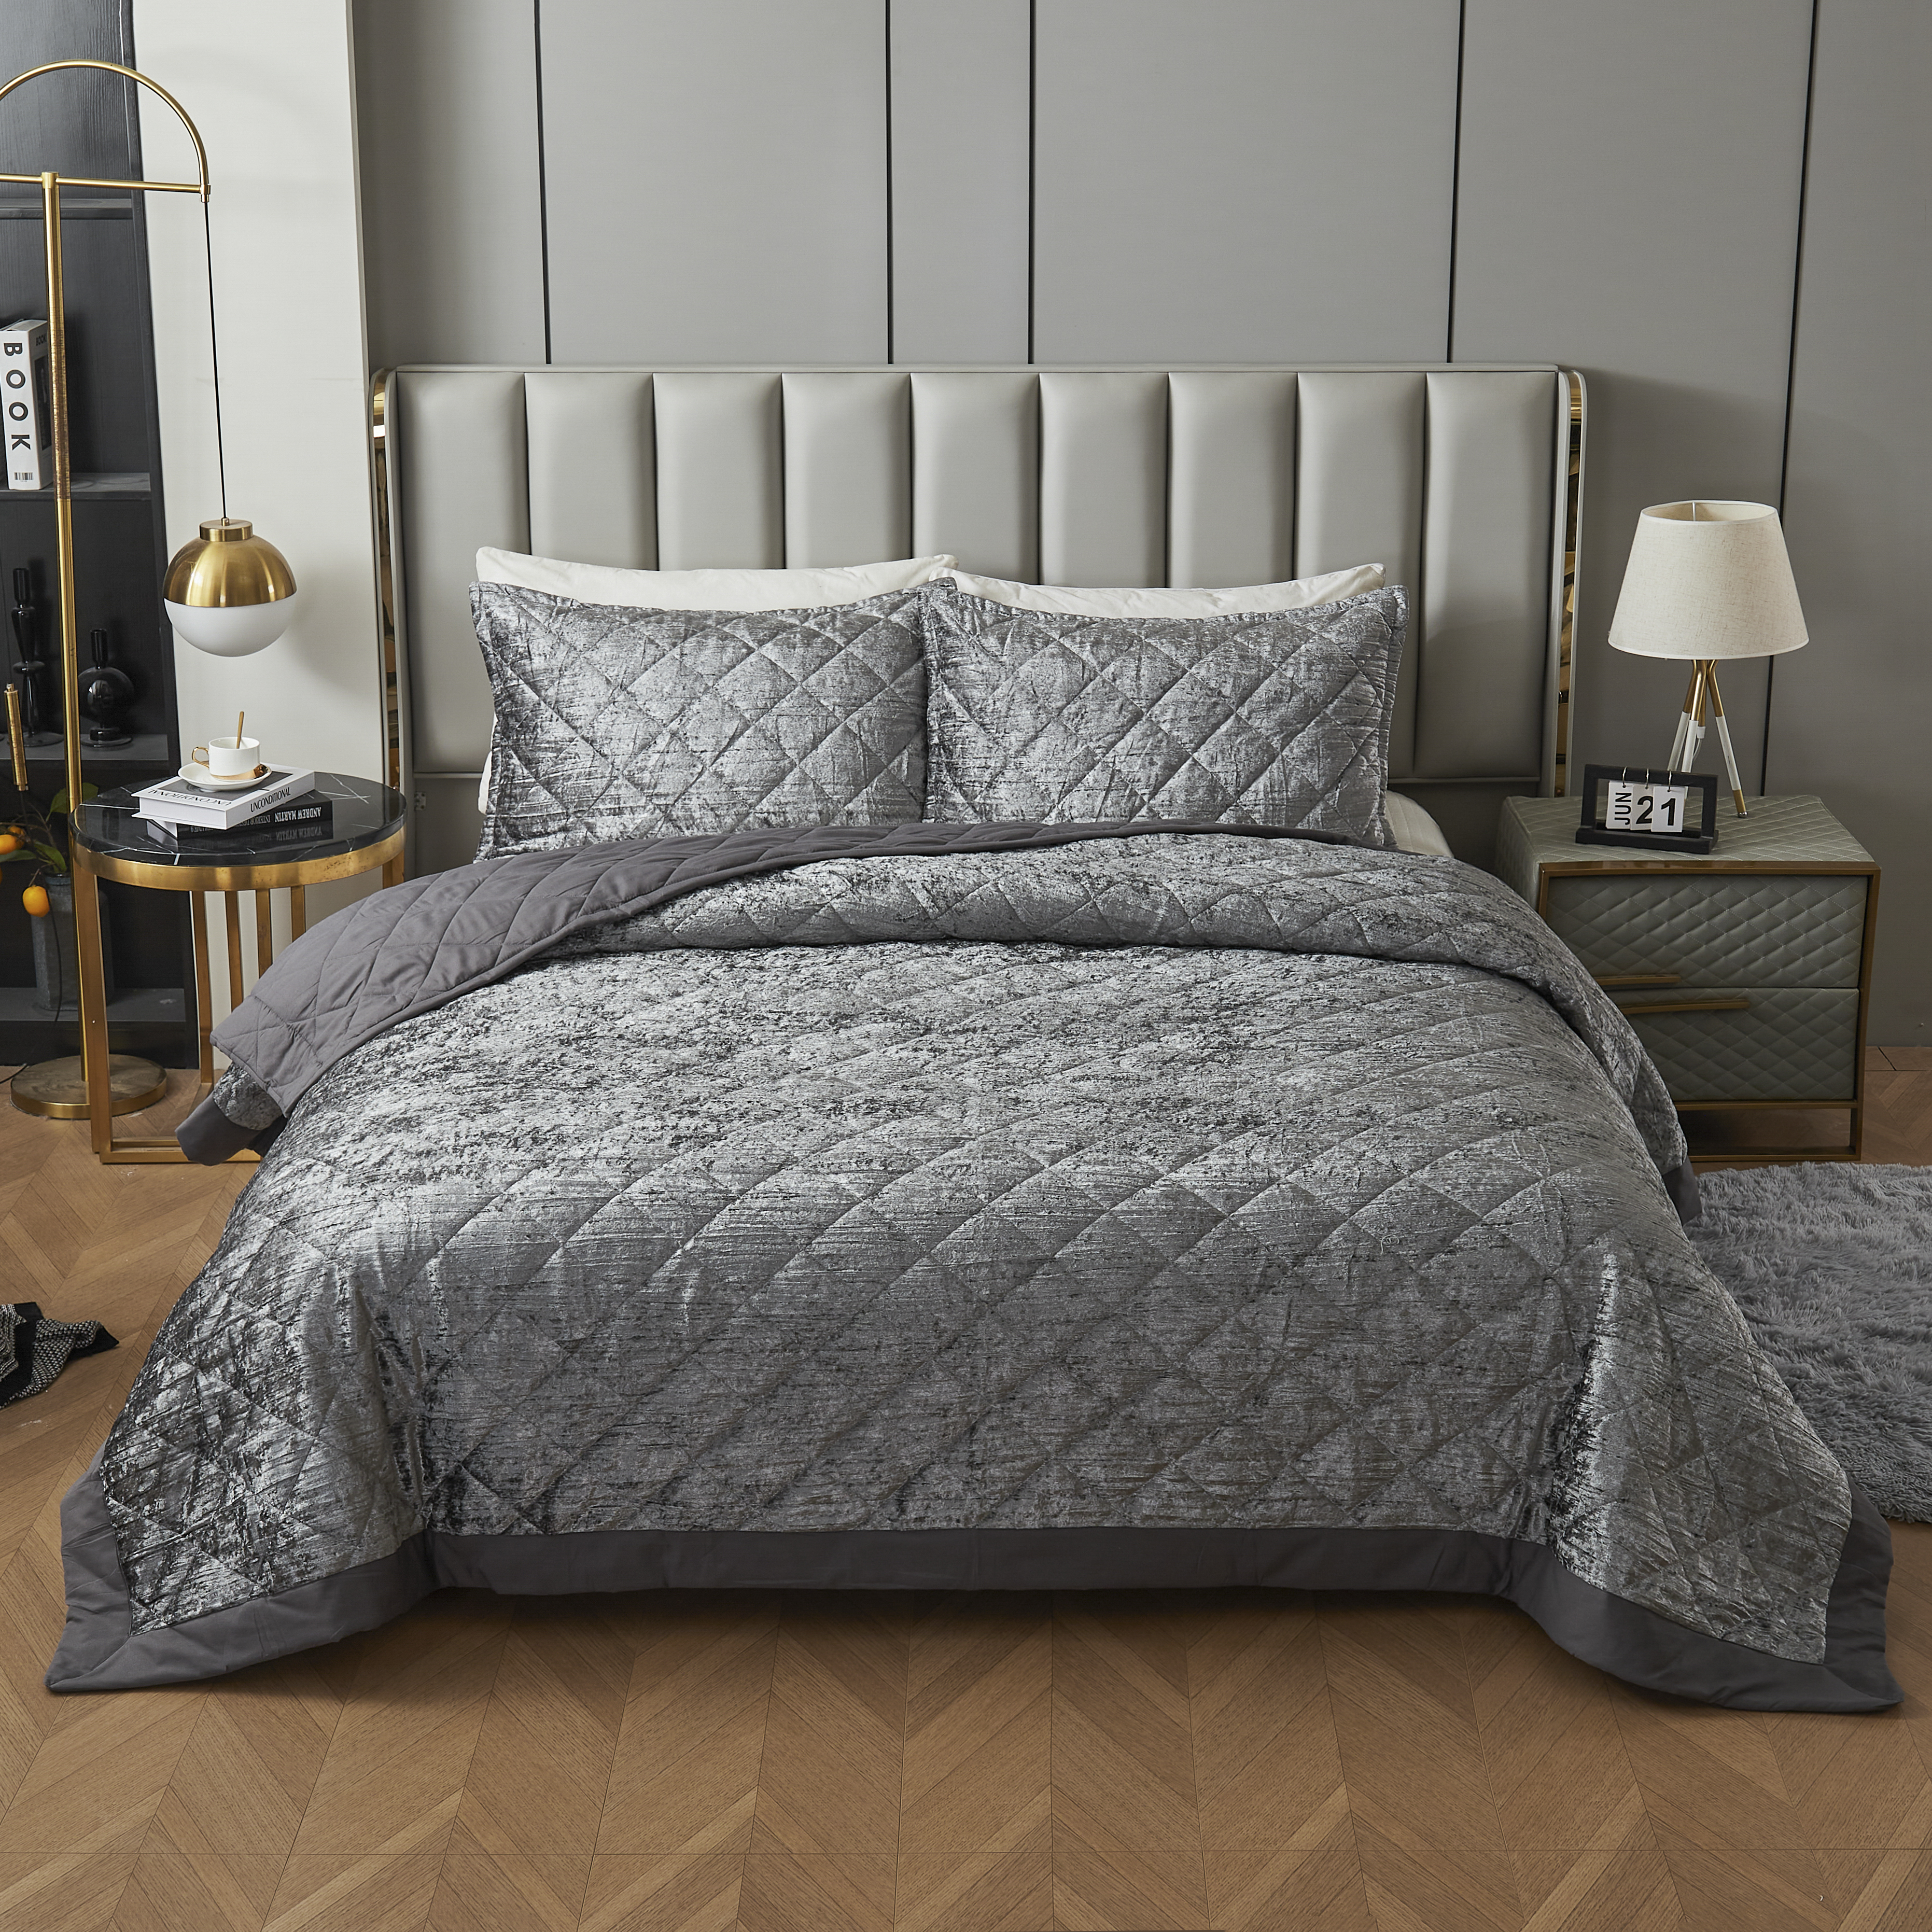 LUCKYBULL Gray Korean Velvet Quilt Set, 3 Pieces Luxury Textured Soft Bedspread with 2 Pillowcases, Reversible Coverlet Set for All Season